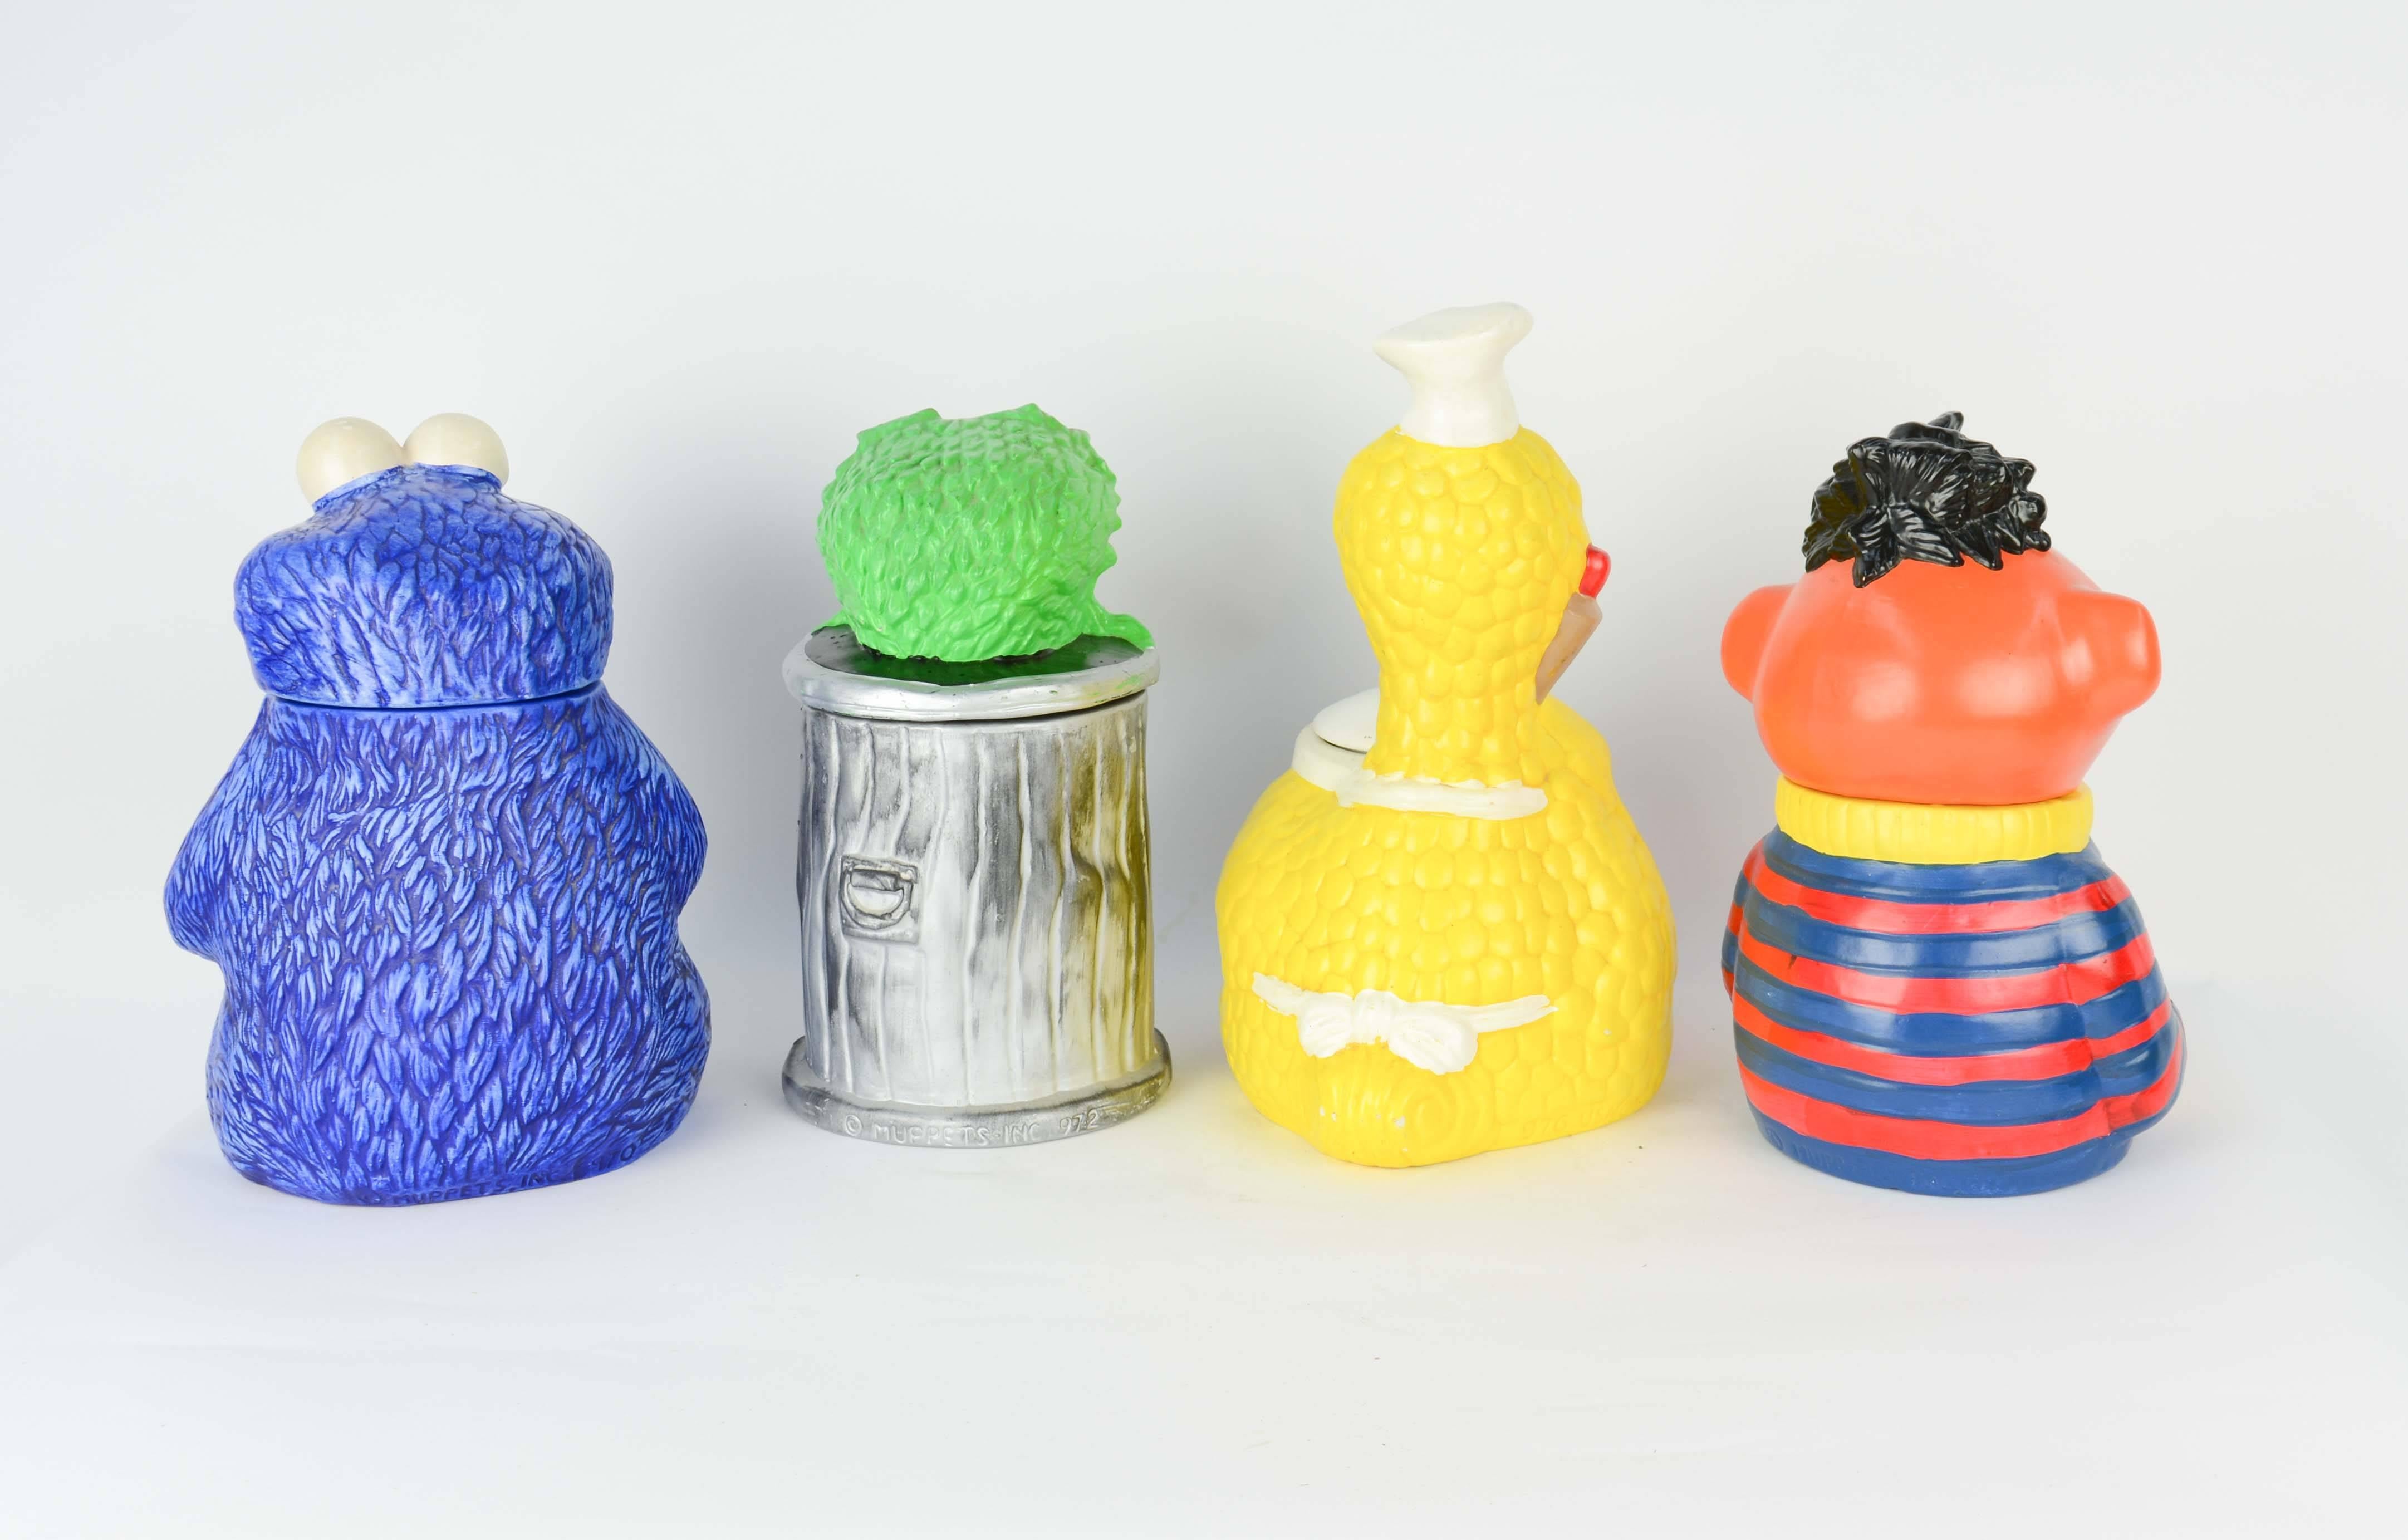 A Amazing Muppet's Sesame Street Cookie Jar Collection from 1973, The set includes four of the four cookie jars from the 1973 line. The collection is Ernie, Cookie Monster, Big Bird and Oscar the grouch.